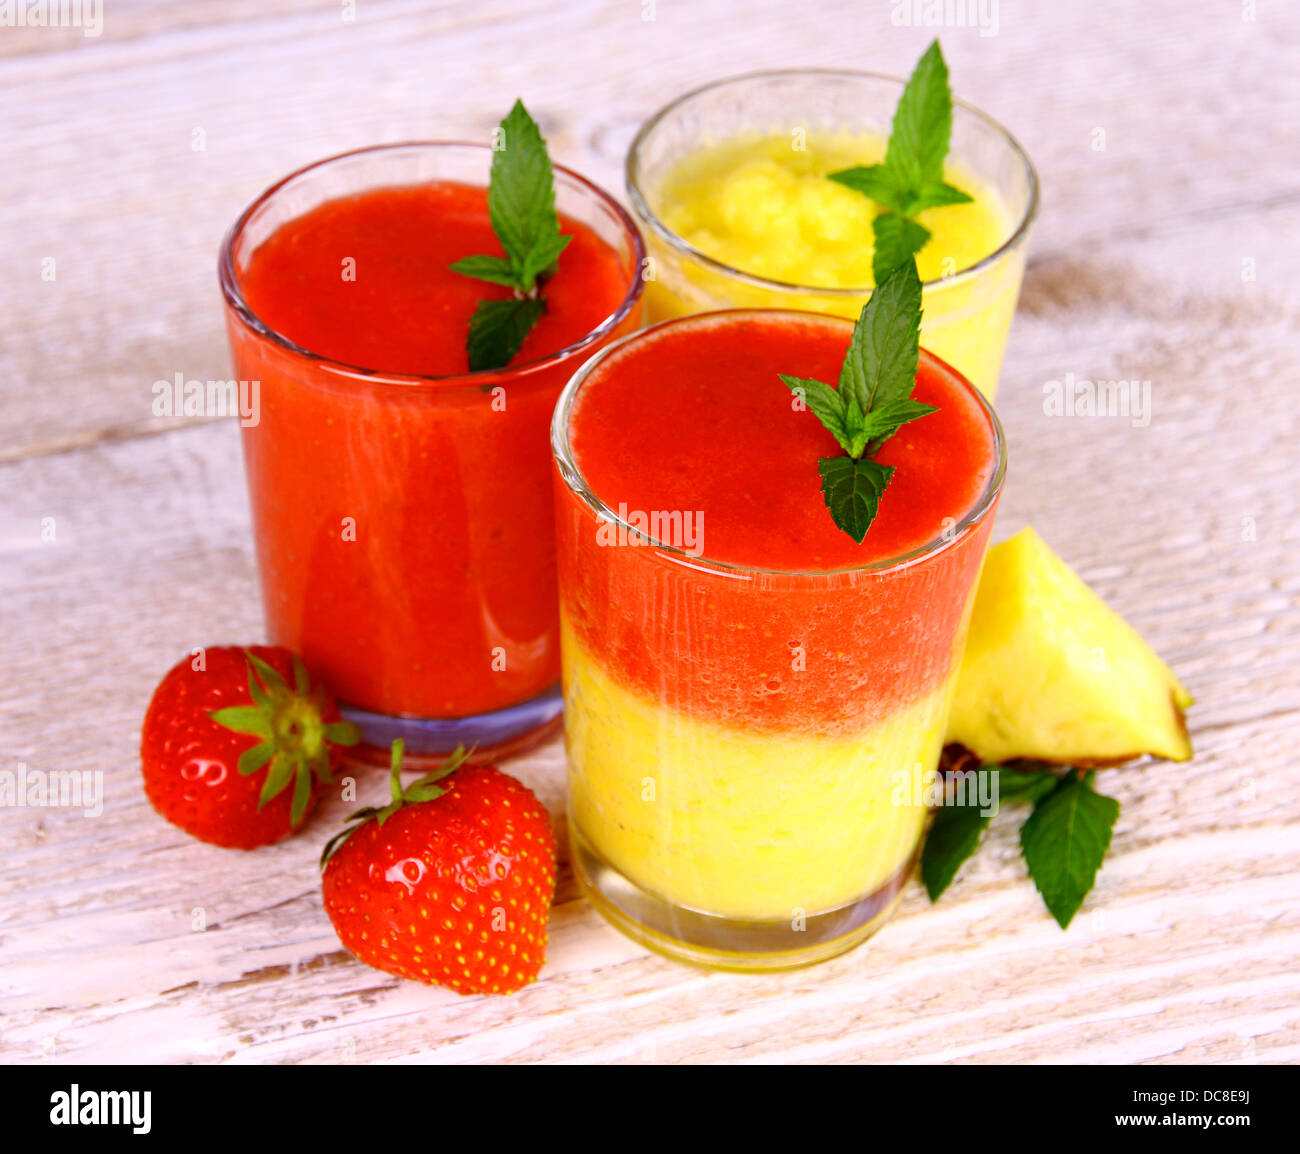 Strawberry and pineapple smoothie in glass mixed, close up Stock Photo